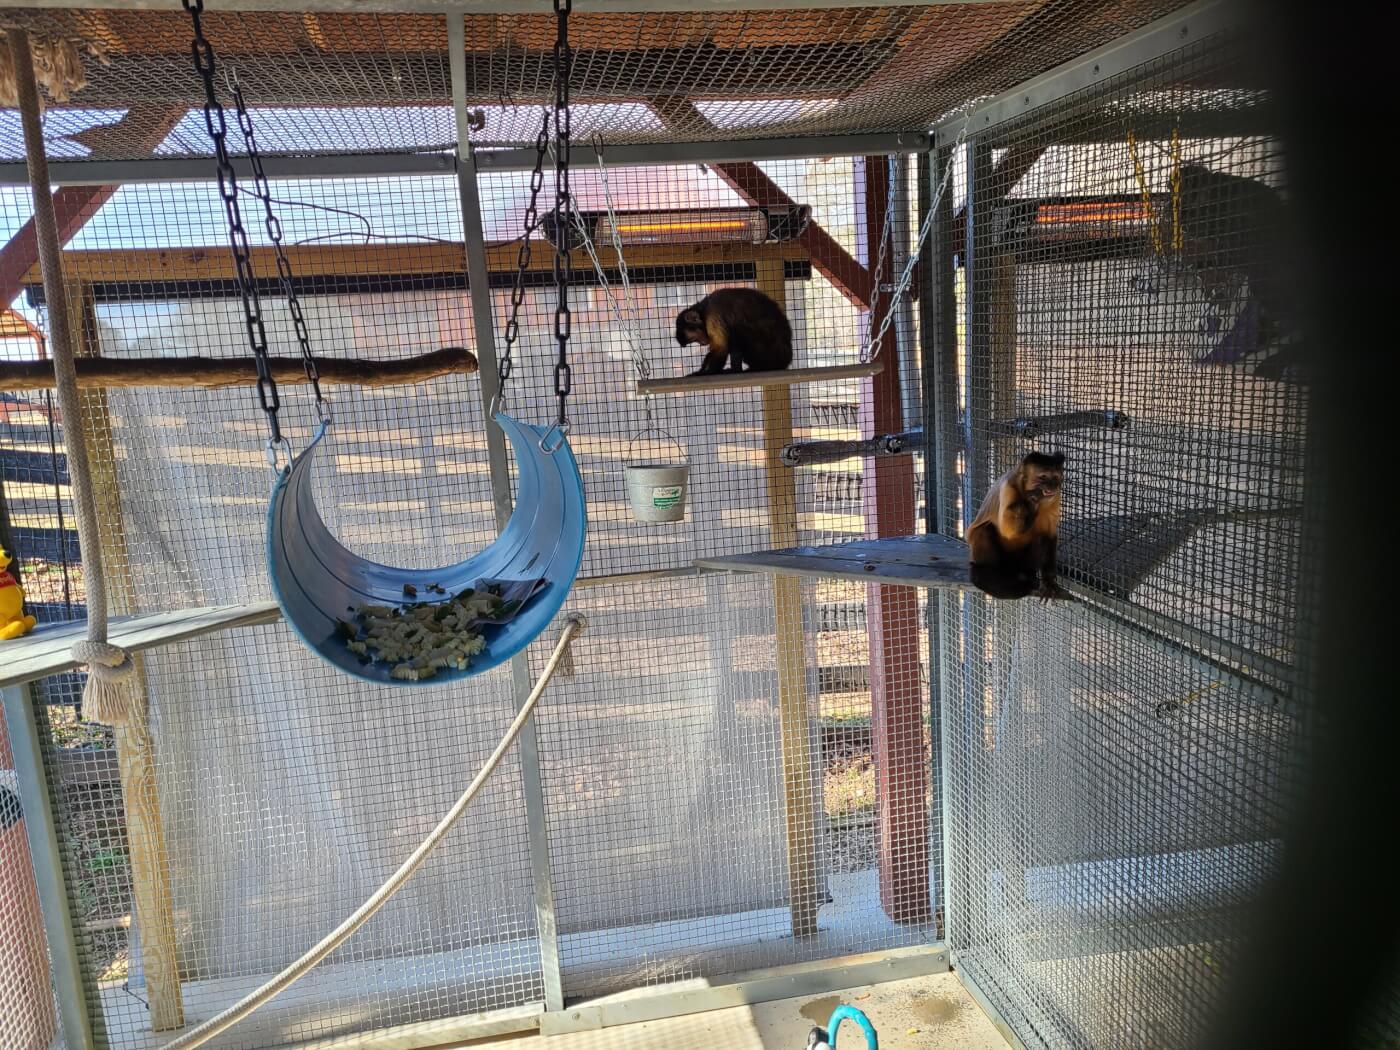 Maya (foreground) and Candy (background) were confined together by Atlanta Film Animals, even though Maya reportedly prevented Candy from eating.